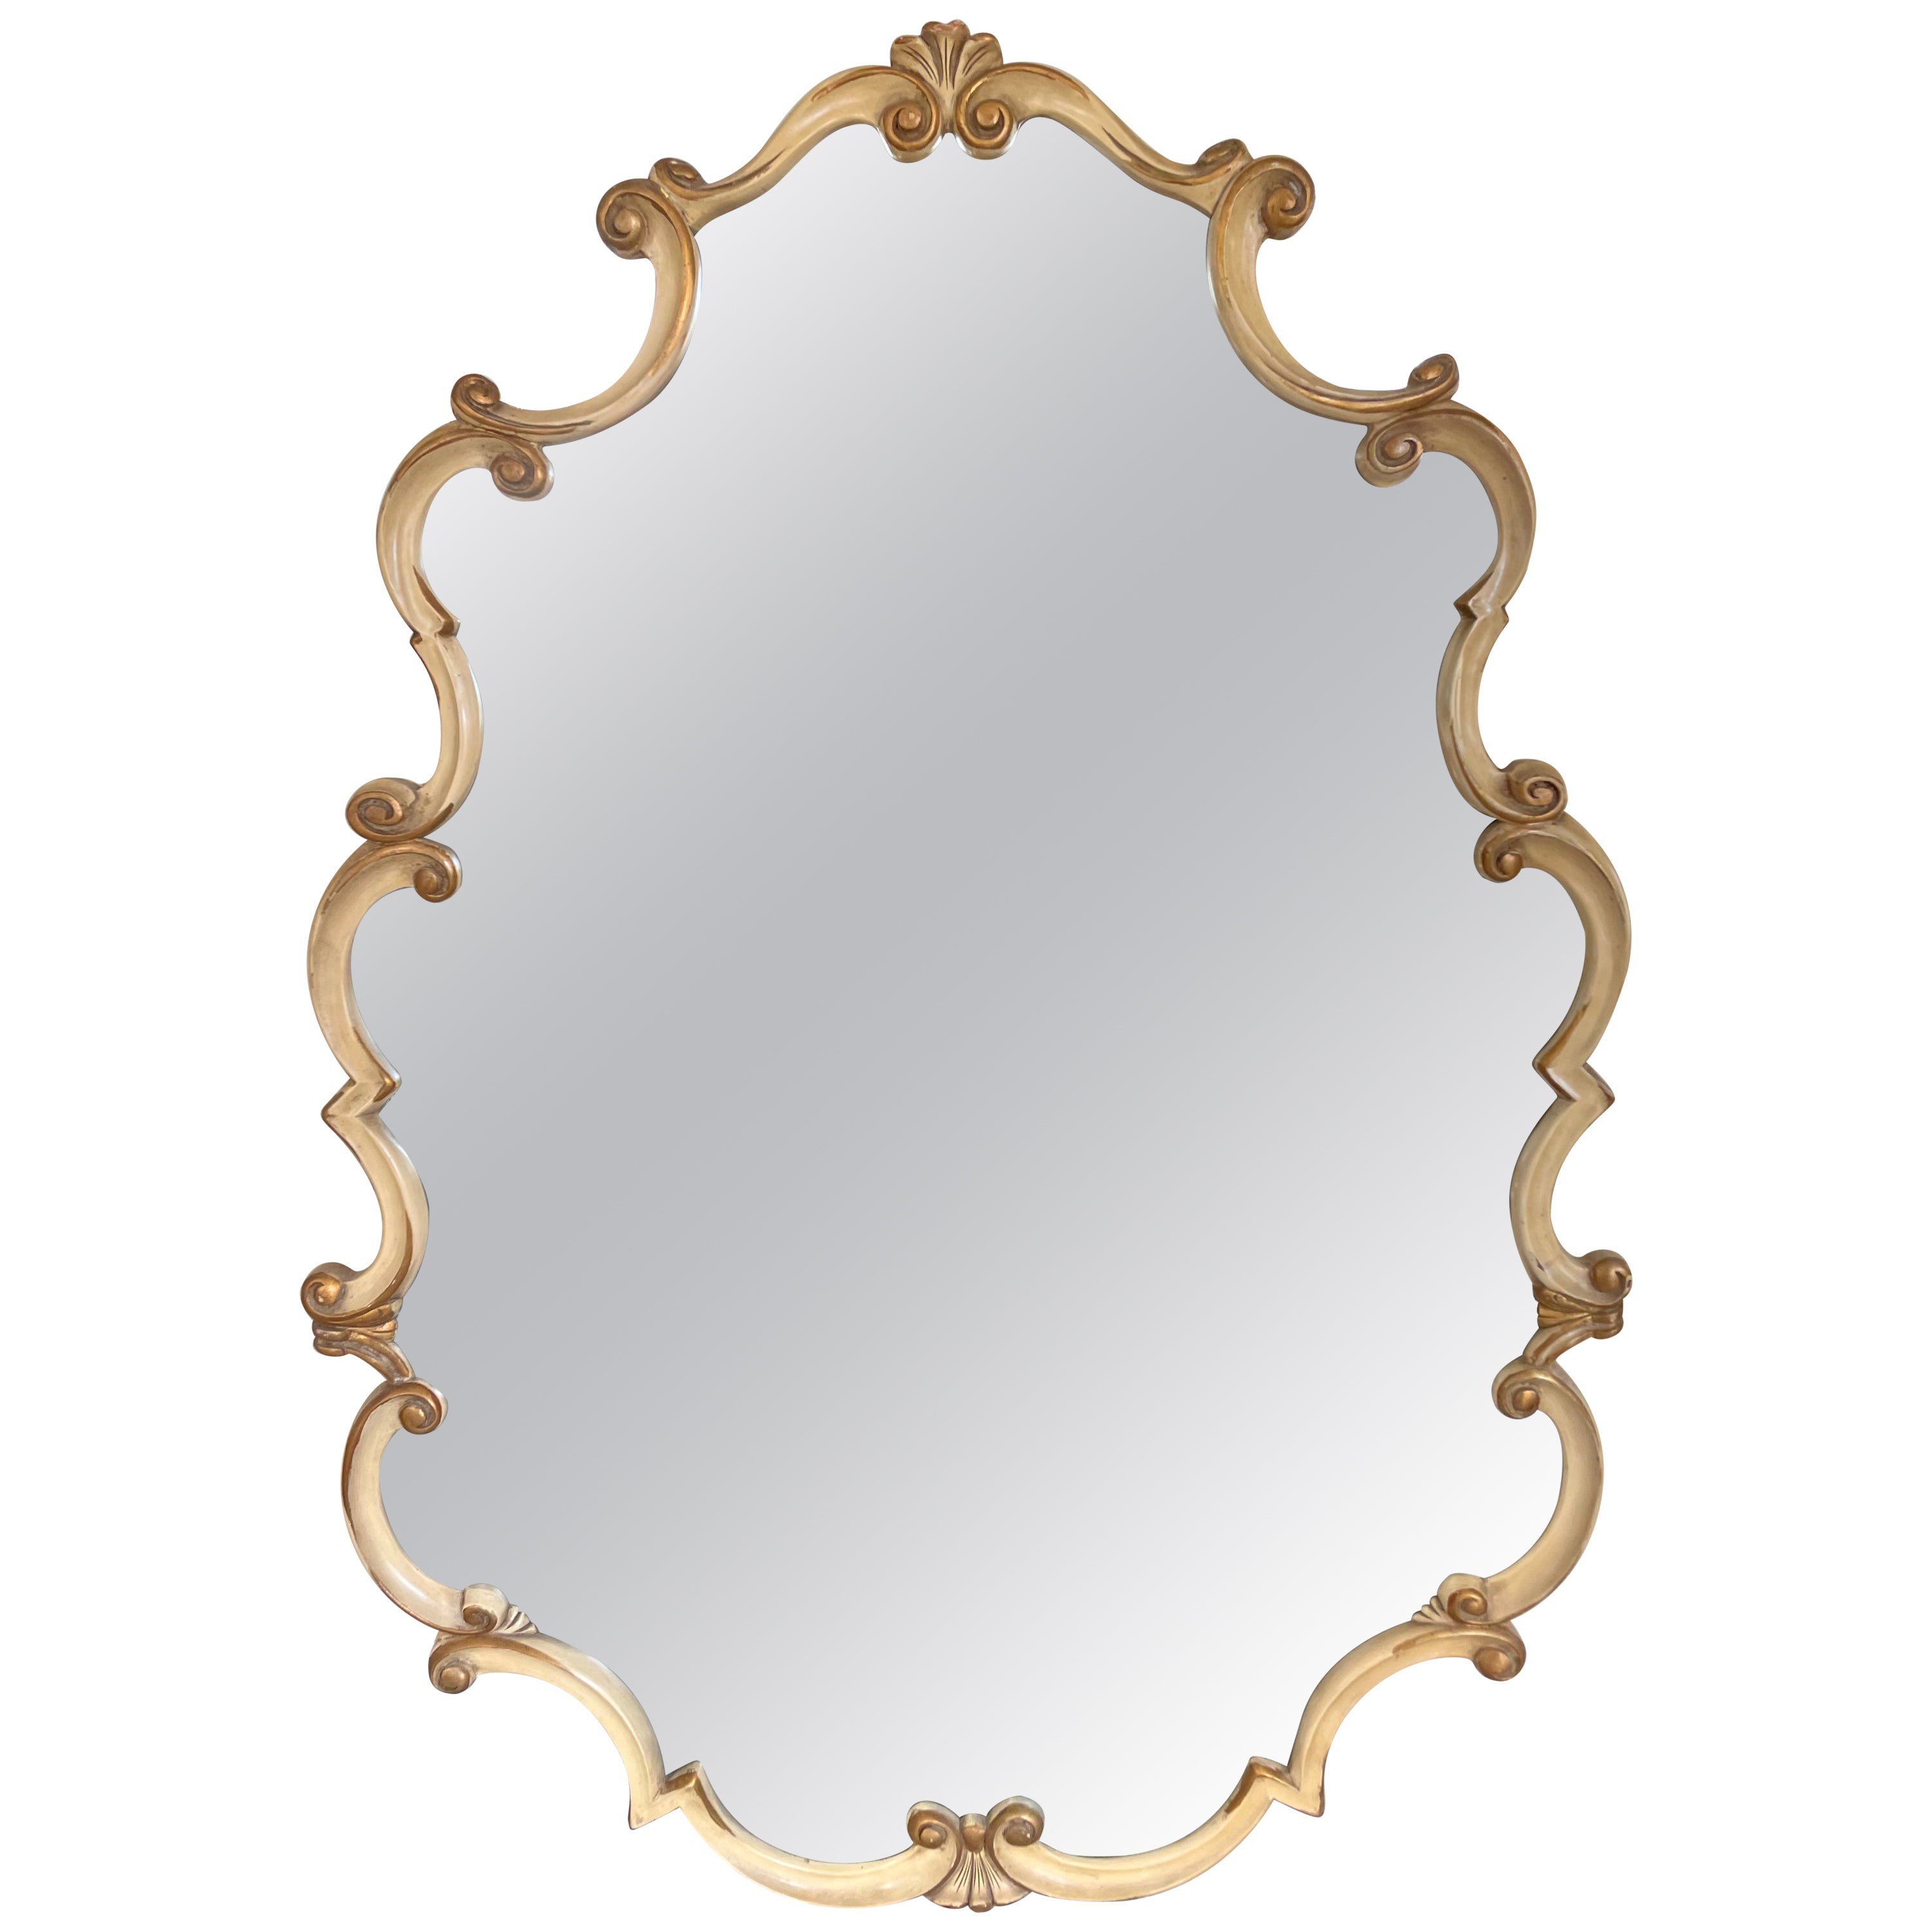 French Regency Style Wall Mirror with Scrolled Fruitwood Frame